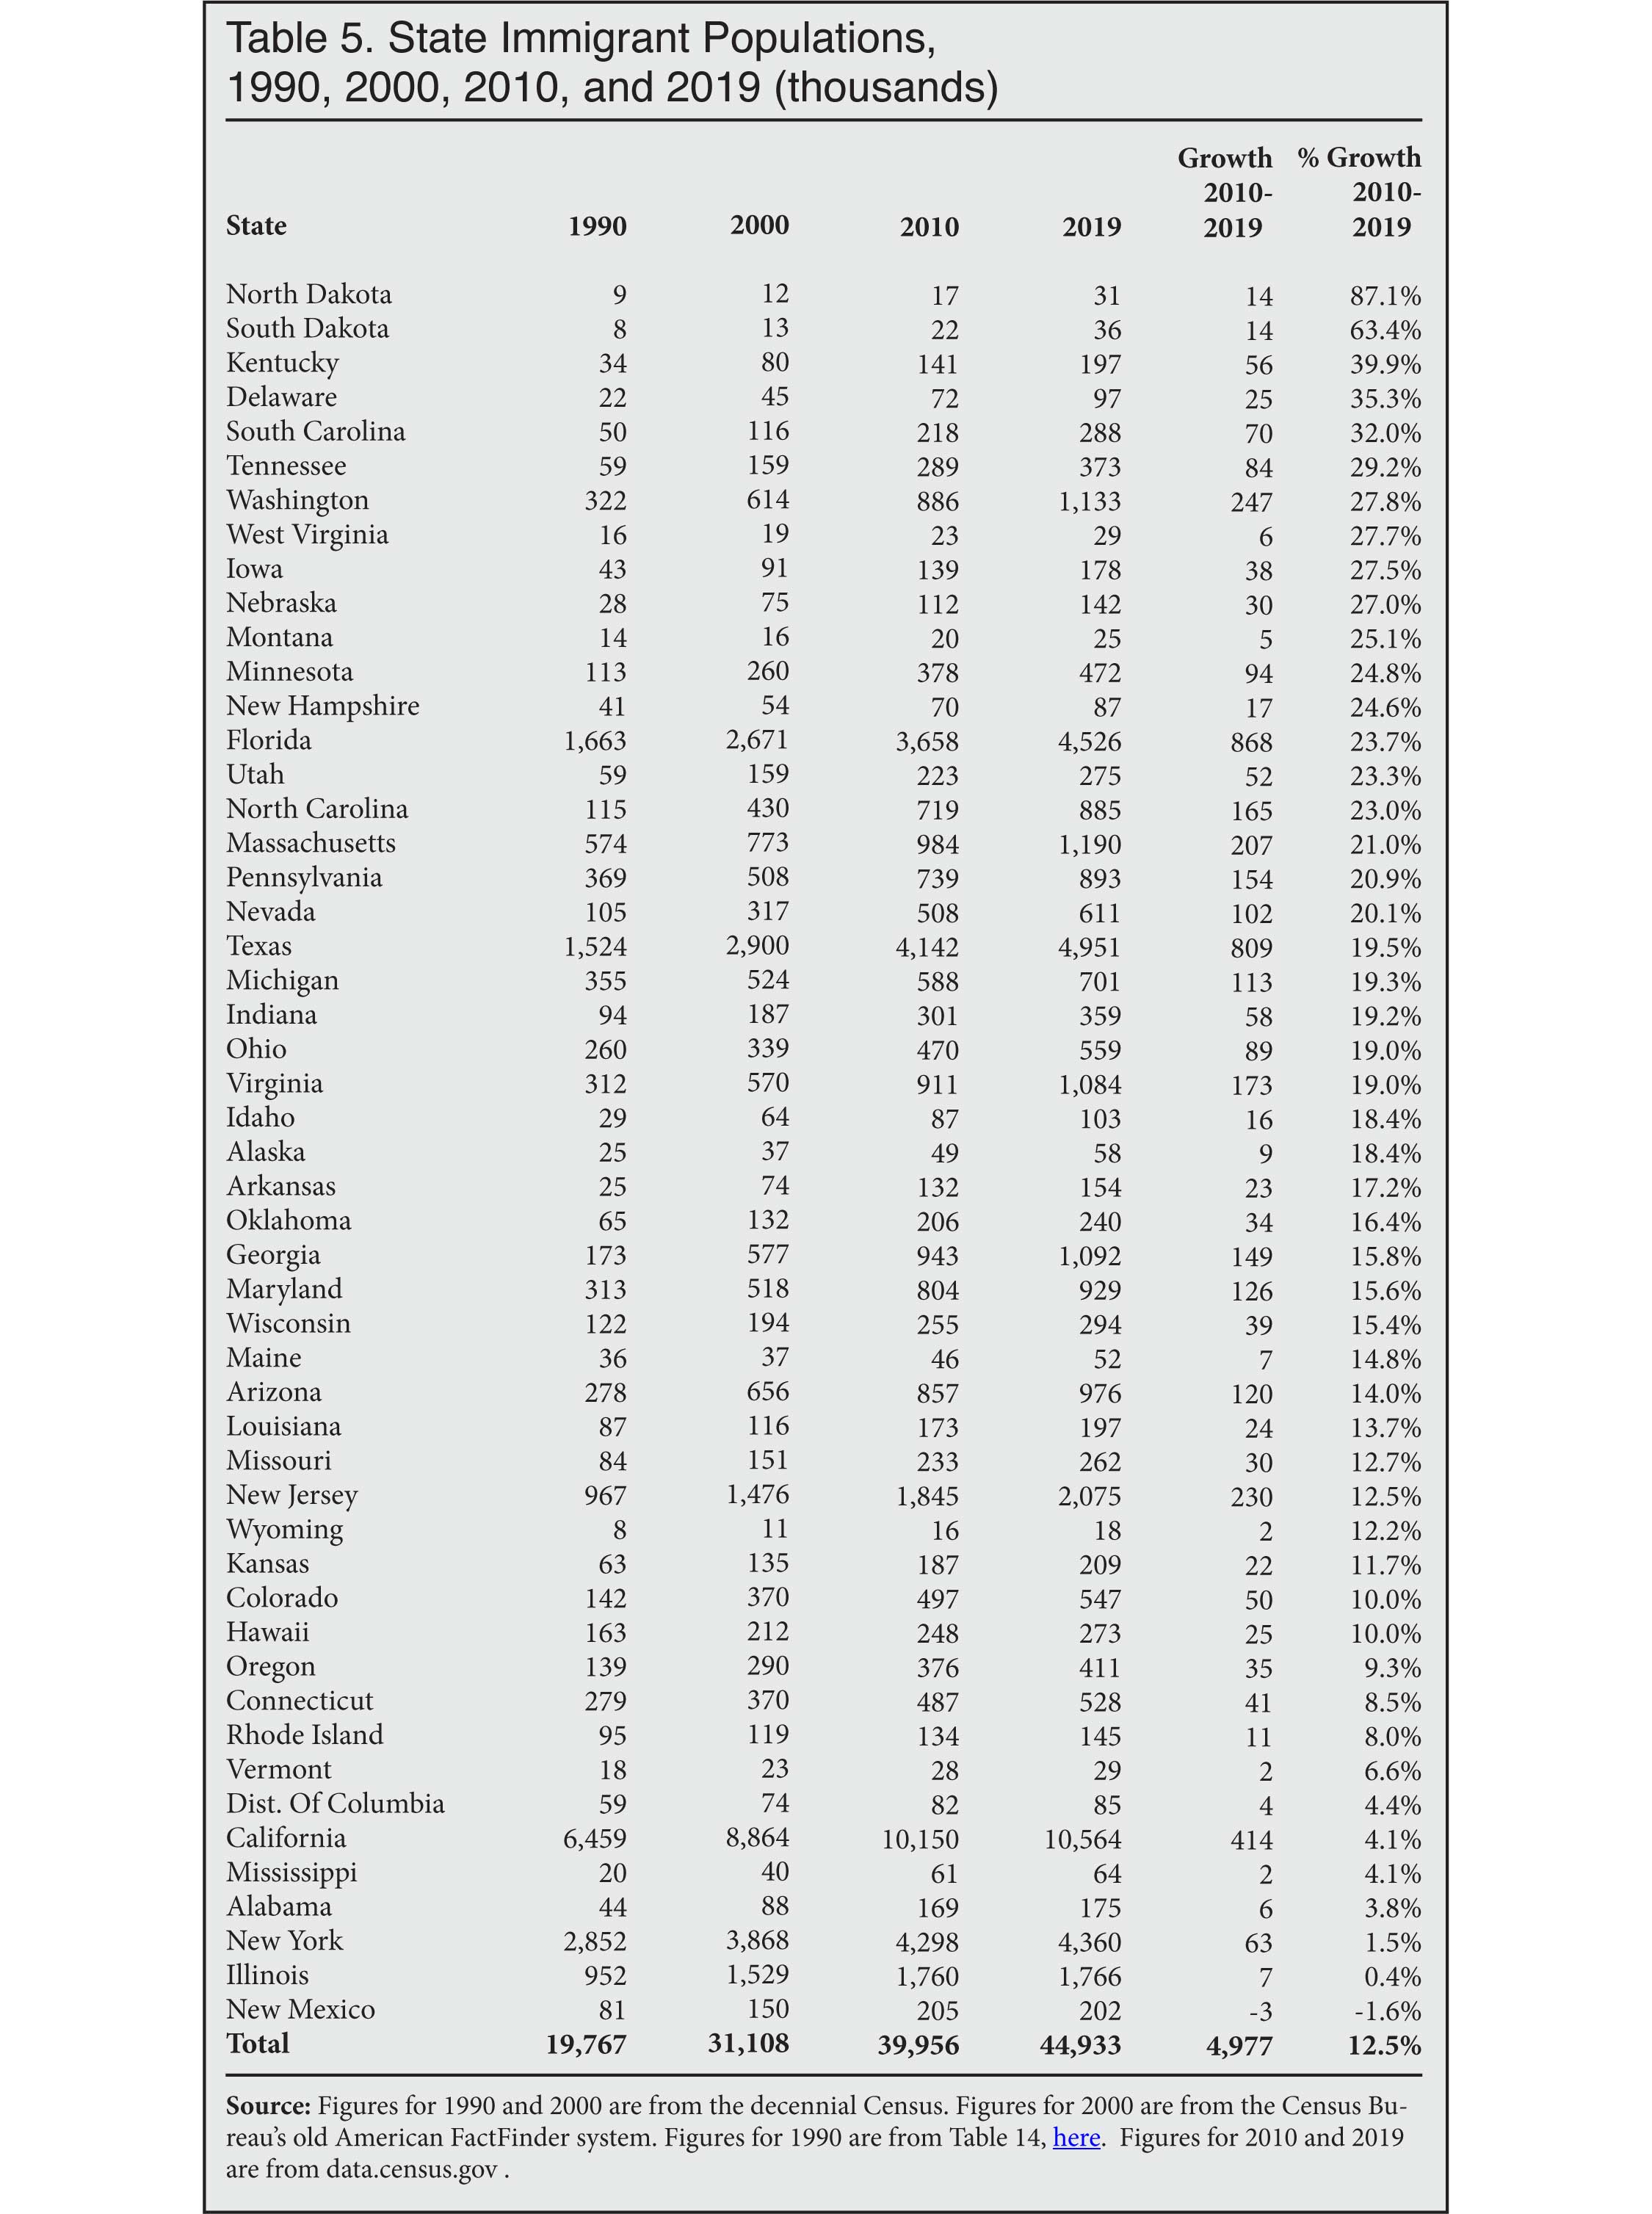 Table: State Immigrant Populations 1990, 2000, 2010, 2019